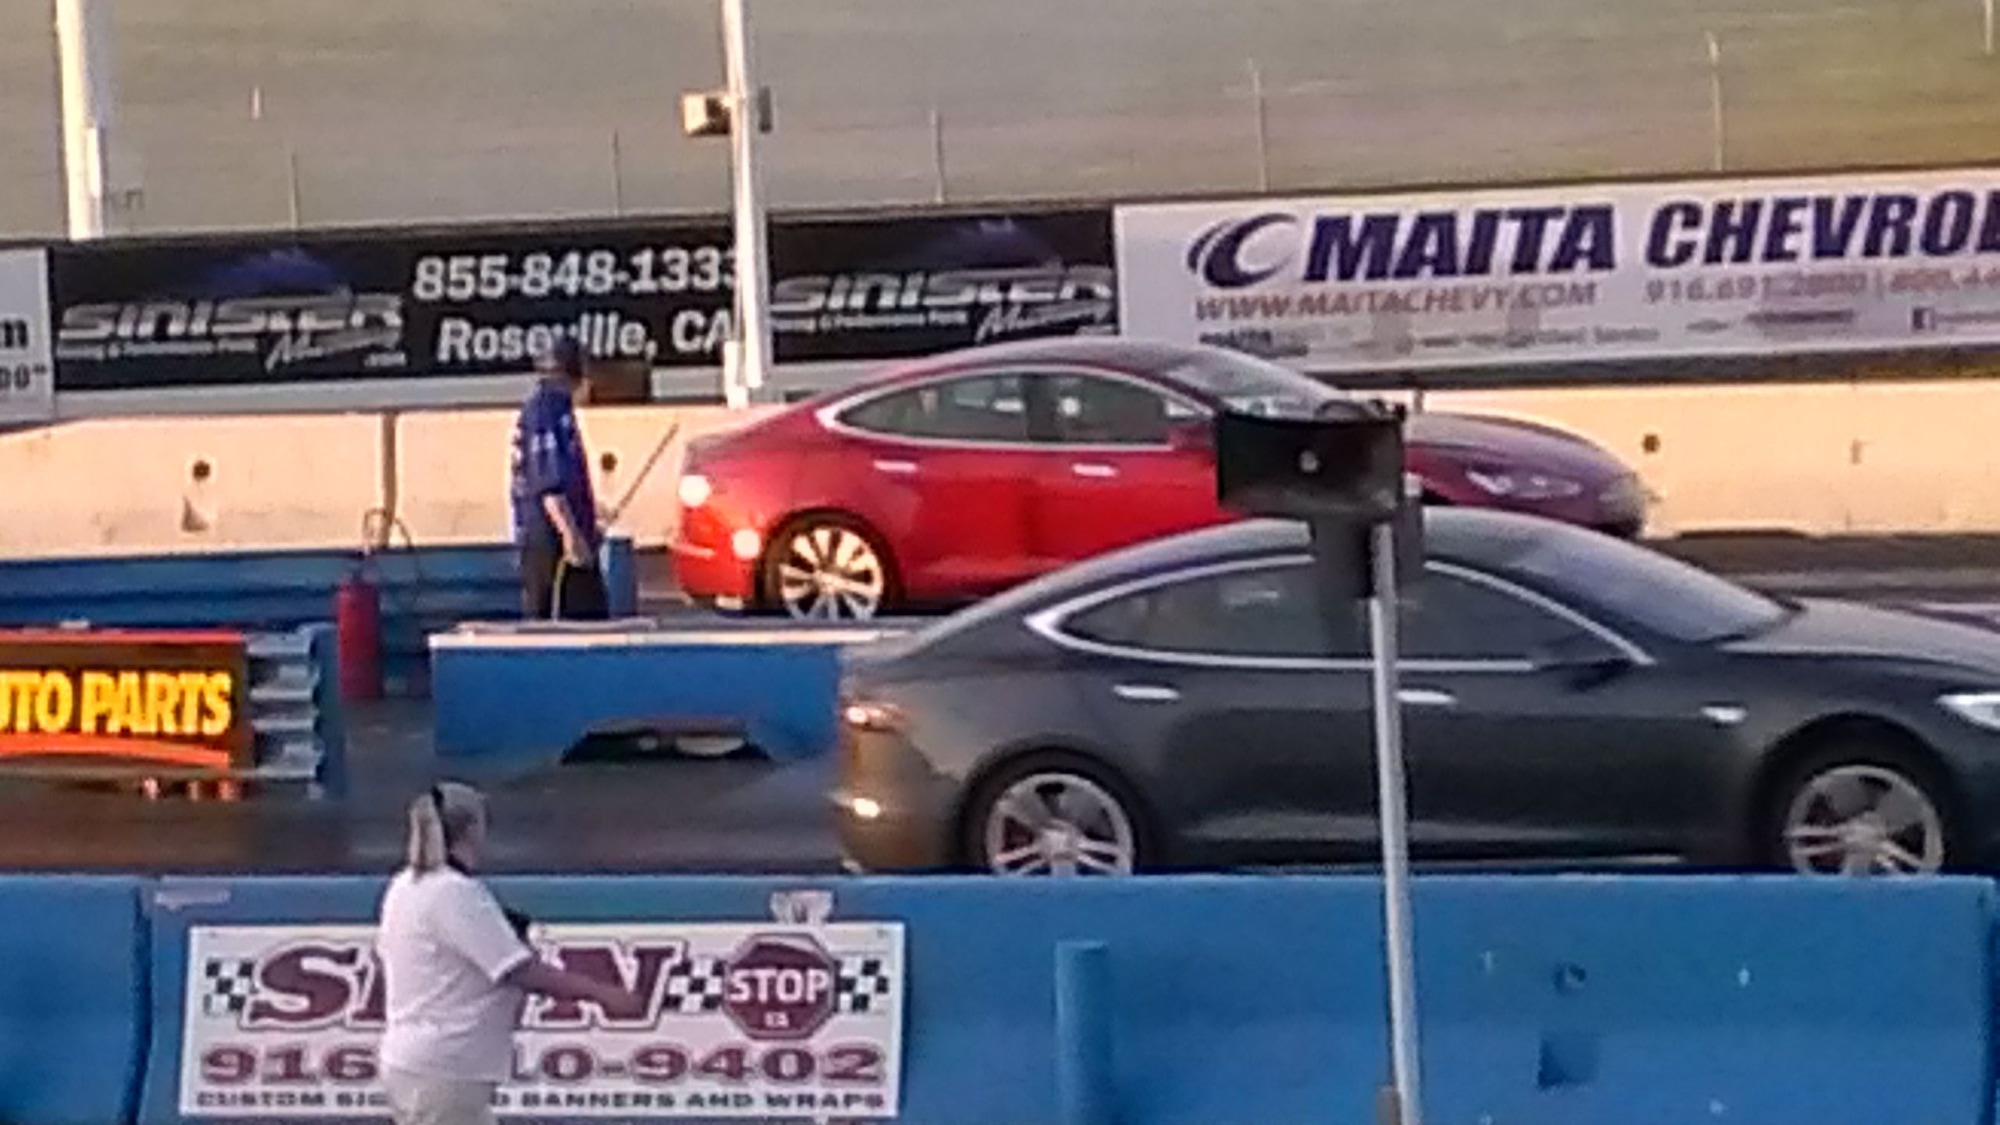 2015 Tesla Model S P85D in Ludicrous mode jumped at start of drag race  [photo: George Parrott]